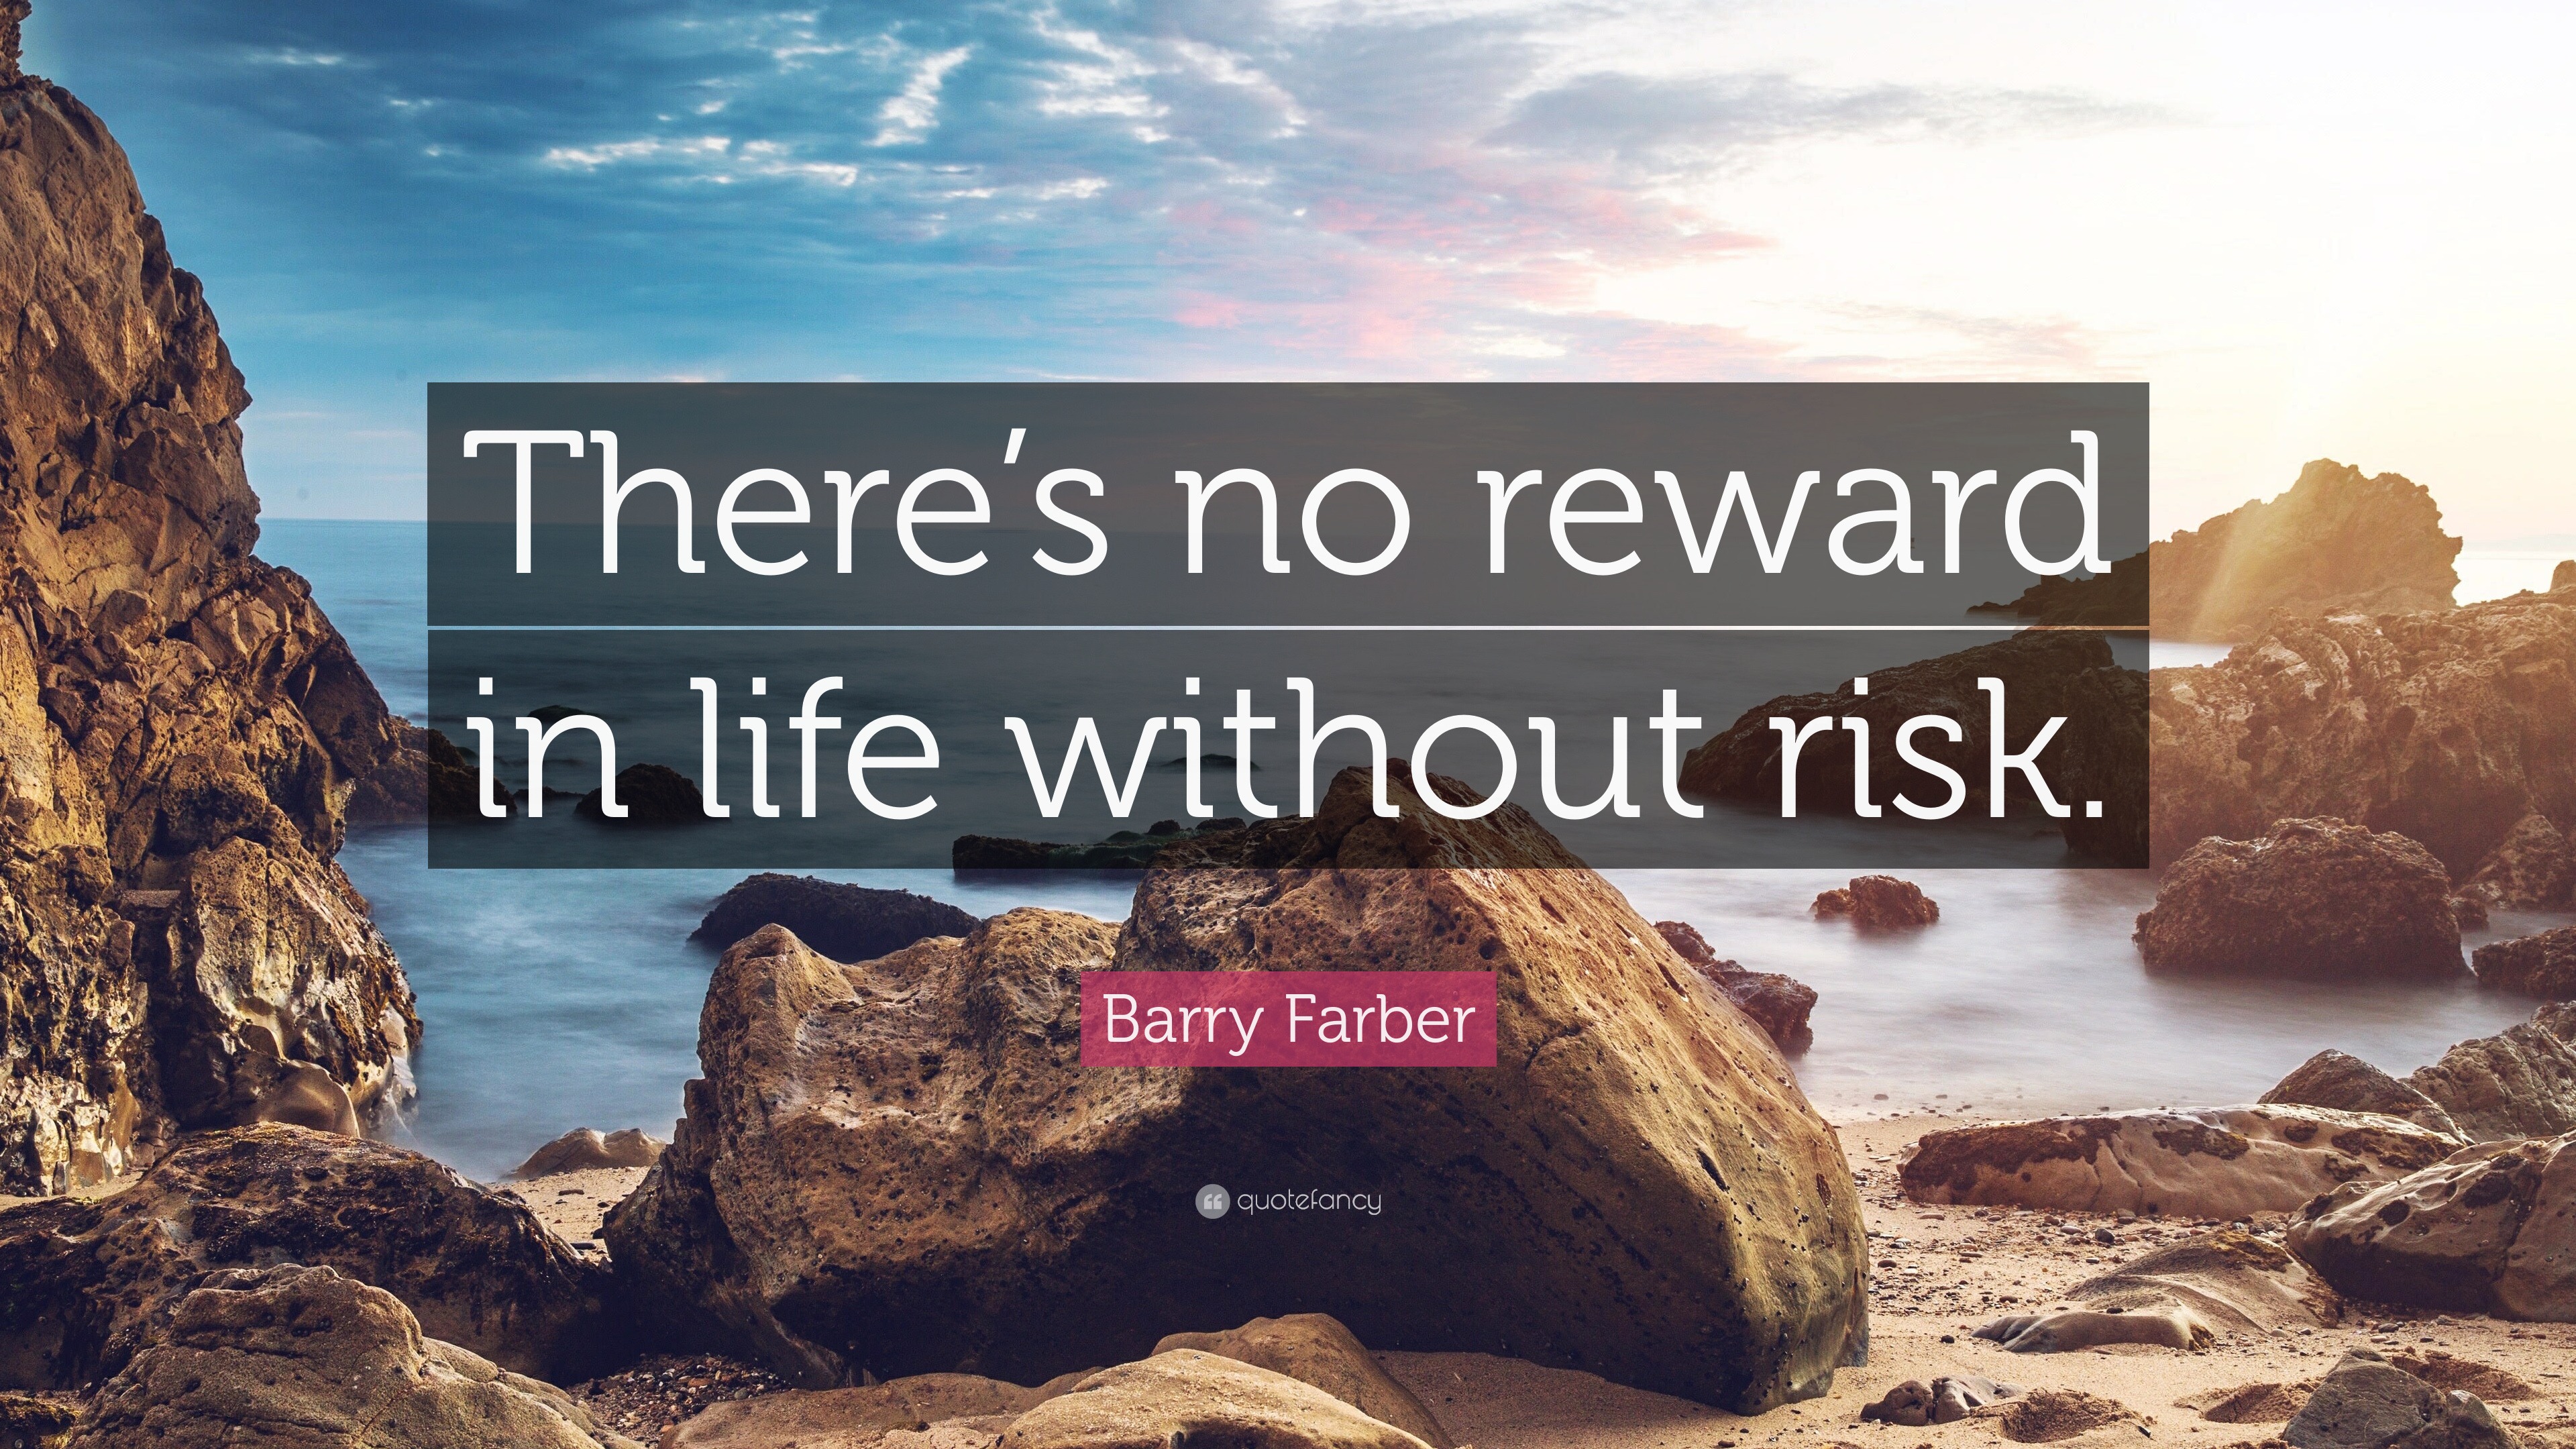 Barry Farber Quote “There s no reward in life without risk ”